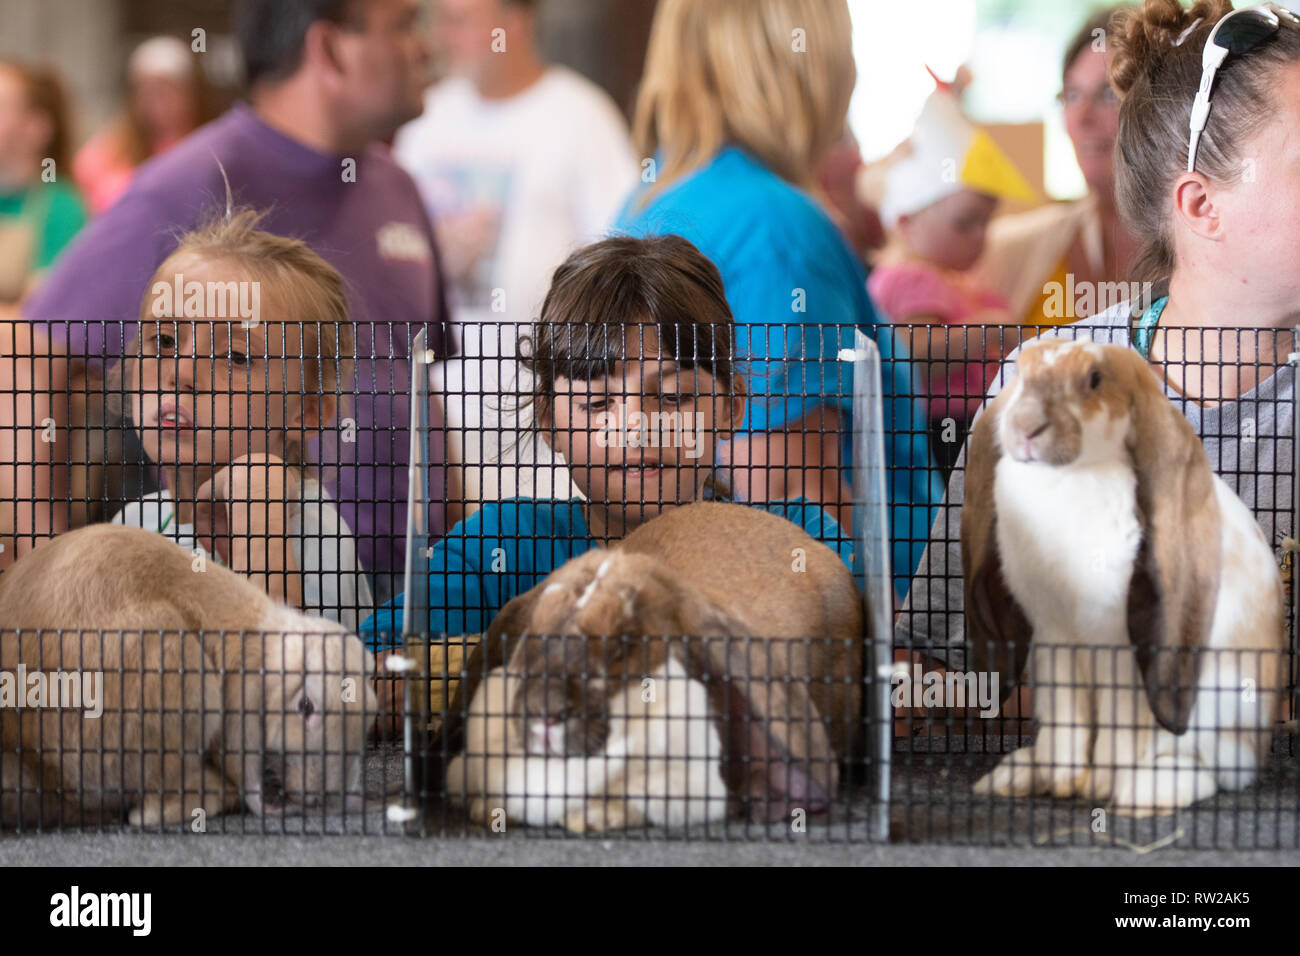 Children look at rabbits behind fenced cages during animal judging at fair,  Timonium, Maryland Stock Photo